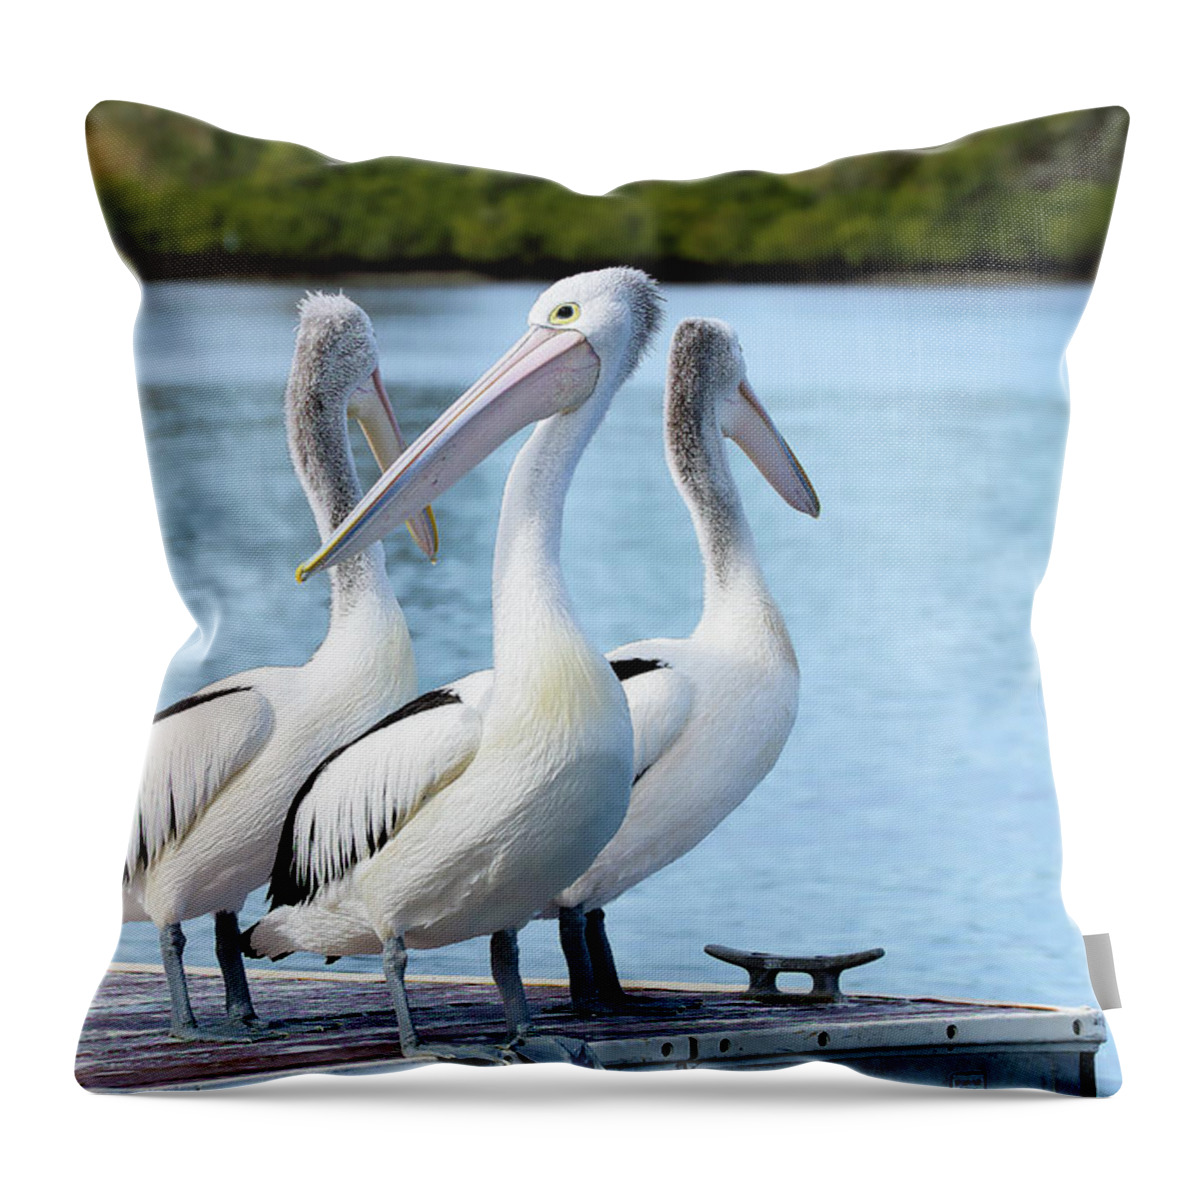 Pelicans Australia Throw Pillow featuring the photograph Pelicans 6663. by Kevin Chippindall